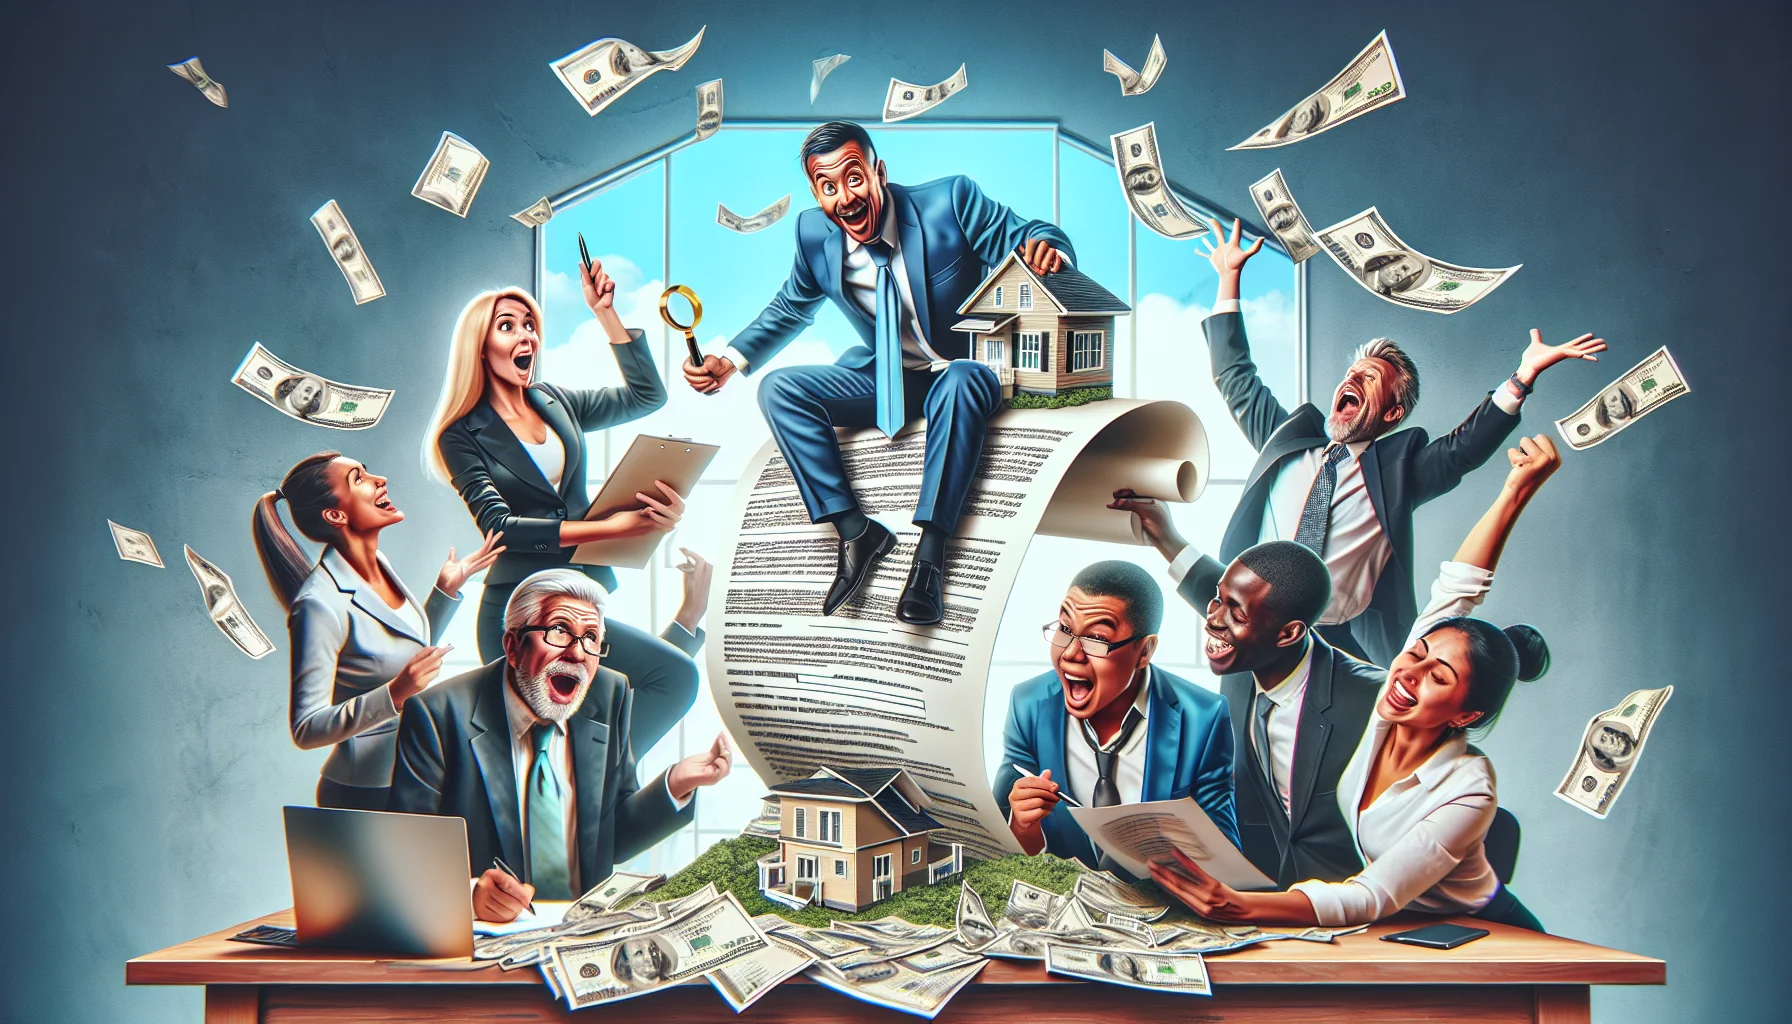 Create an amusing, realistic image showcasing the process of investing in real estate notes. Imagine a scenario where a diverse group of individuals are present: a Caucasian female real estate agent with a large pile of property papers, an ecstatic middle-aged Hispanic man holding a pen ready to sign, a confused young South Asian woman examining the papers with a magnifying glass, and a cheering Black man literally tossing money into the air. Add to the humor by incorporating a large, graphically depicted note, a house miniature sliding down it, reflecting the ups and downs of real estate investing. They are all present in a bright, anticipating environment signifying an investing office setting.